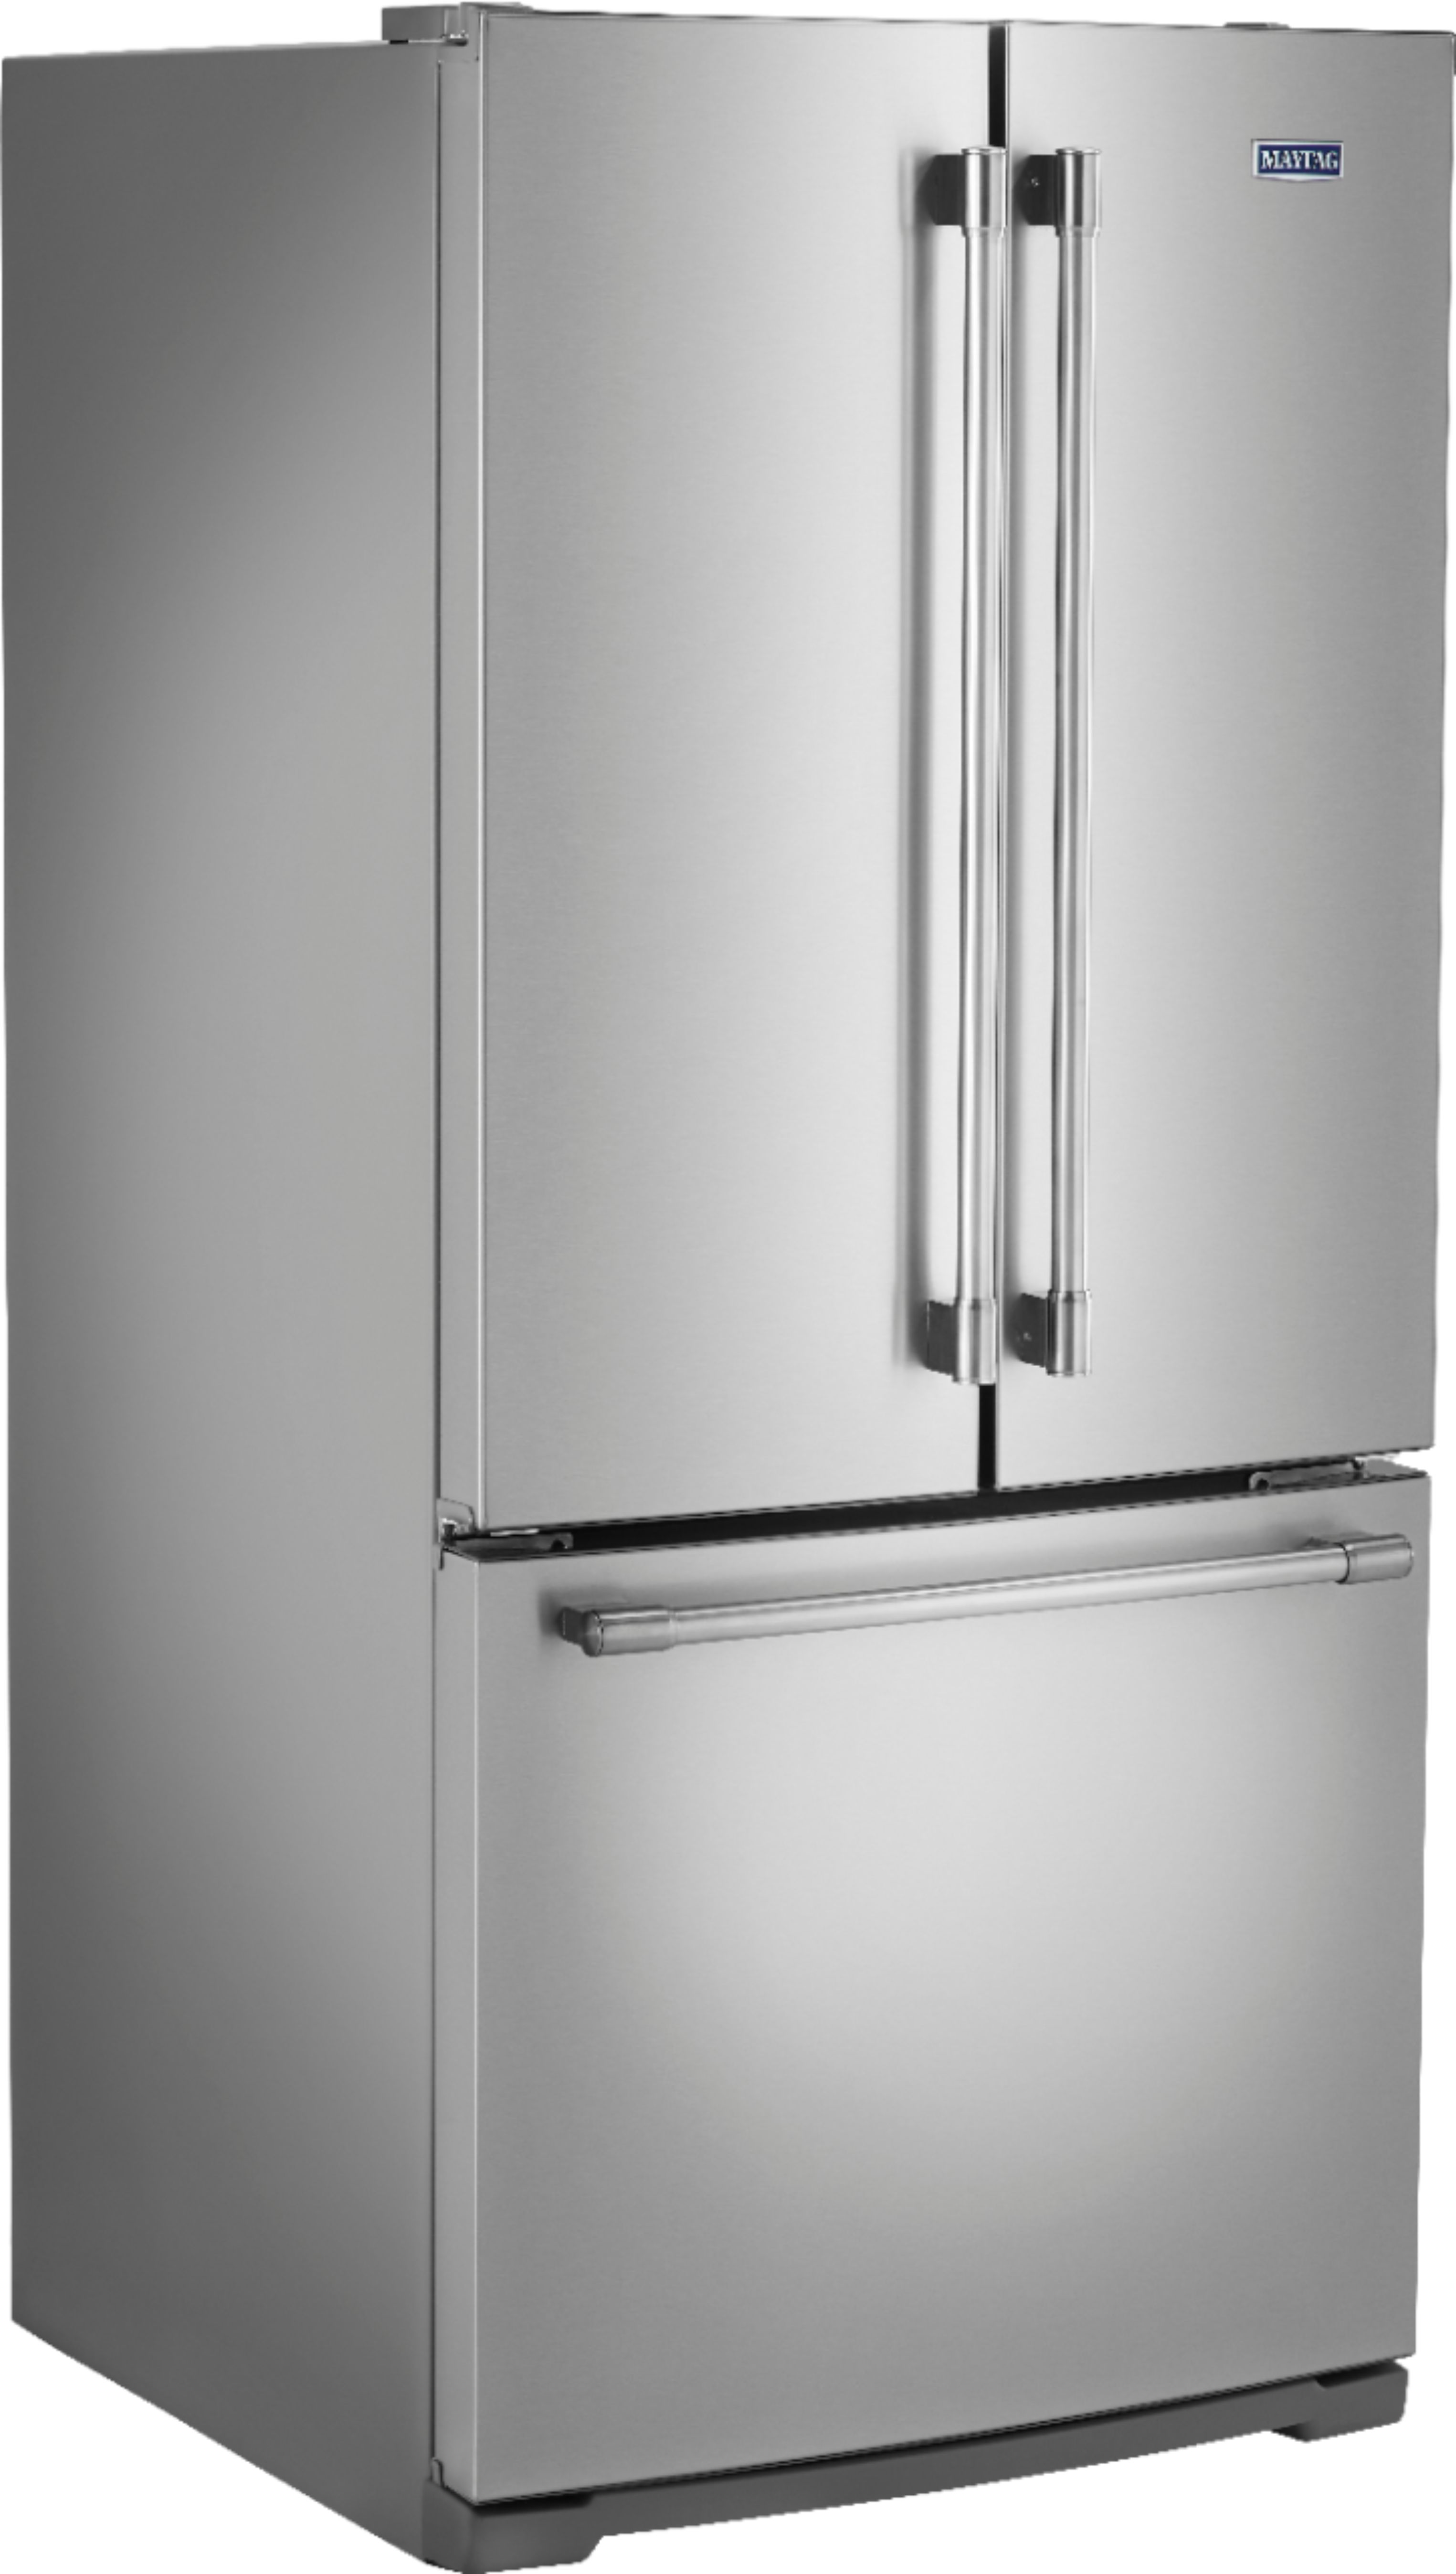 Angle View: Maytag - 19.7 Cu. Ft. French Door Refrigerator - Stainless steel